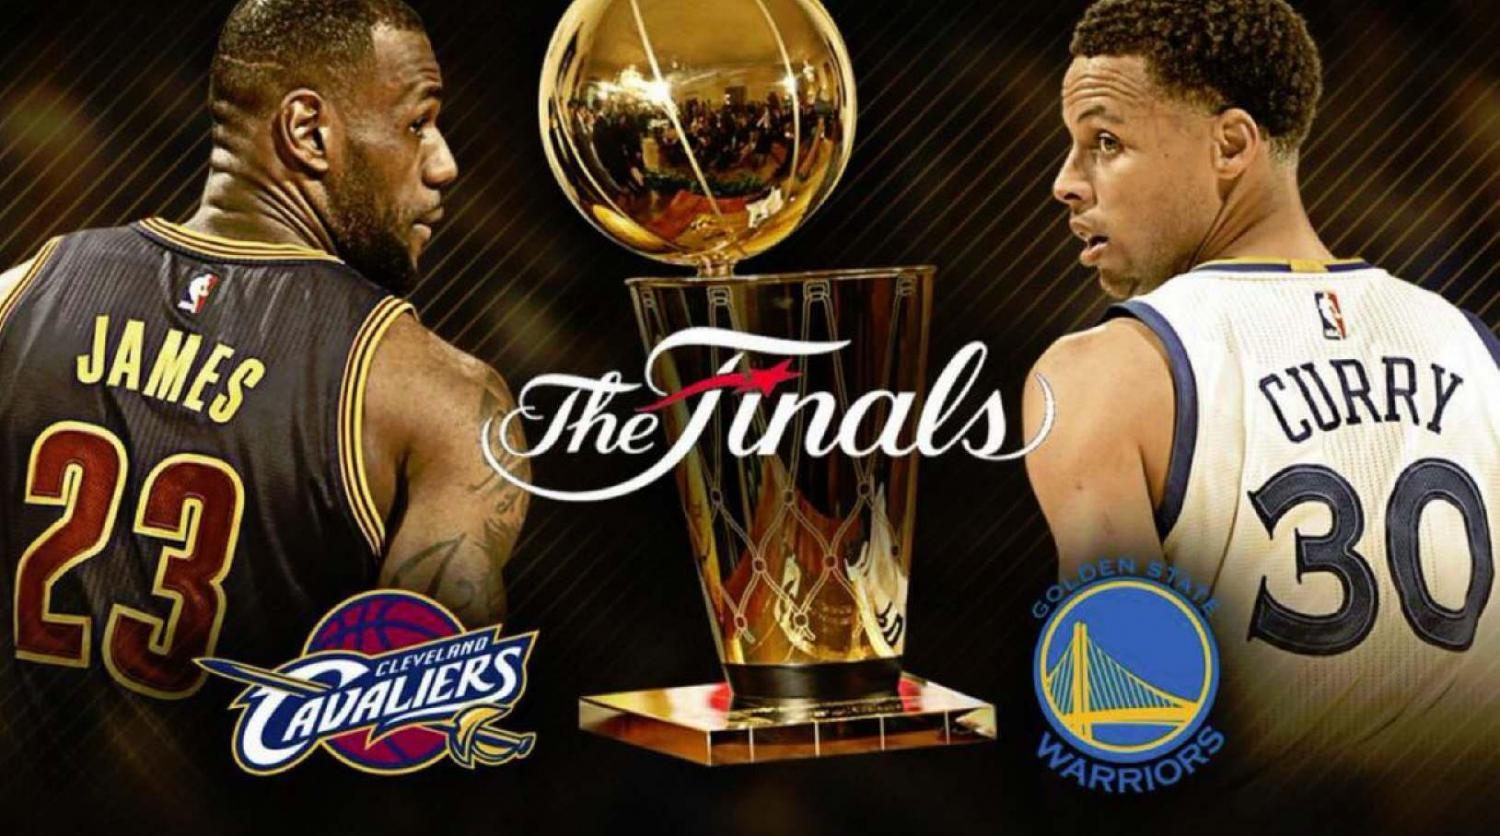 The NBA Finals will not disappoint